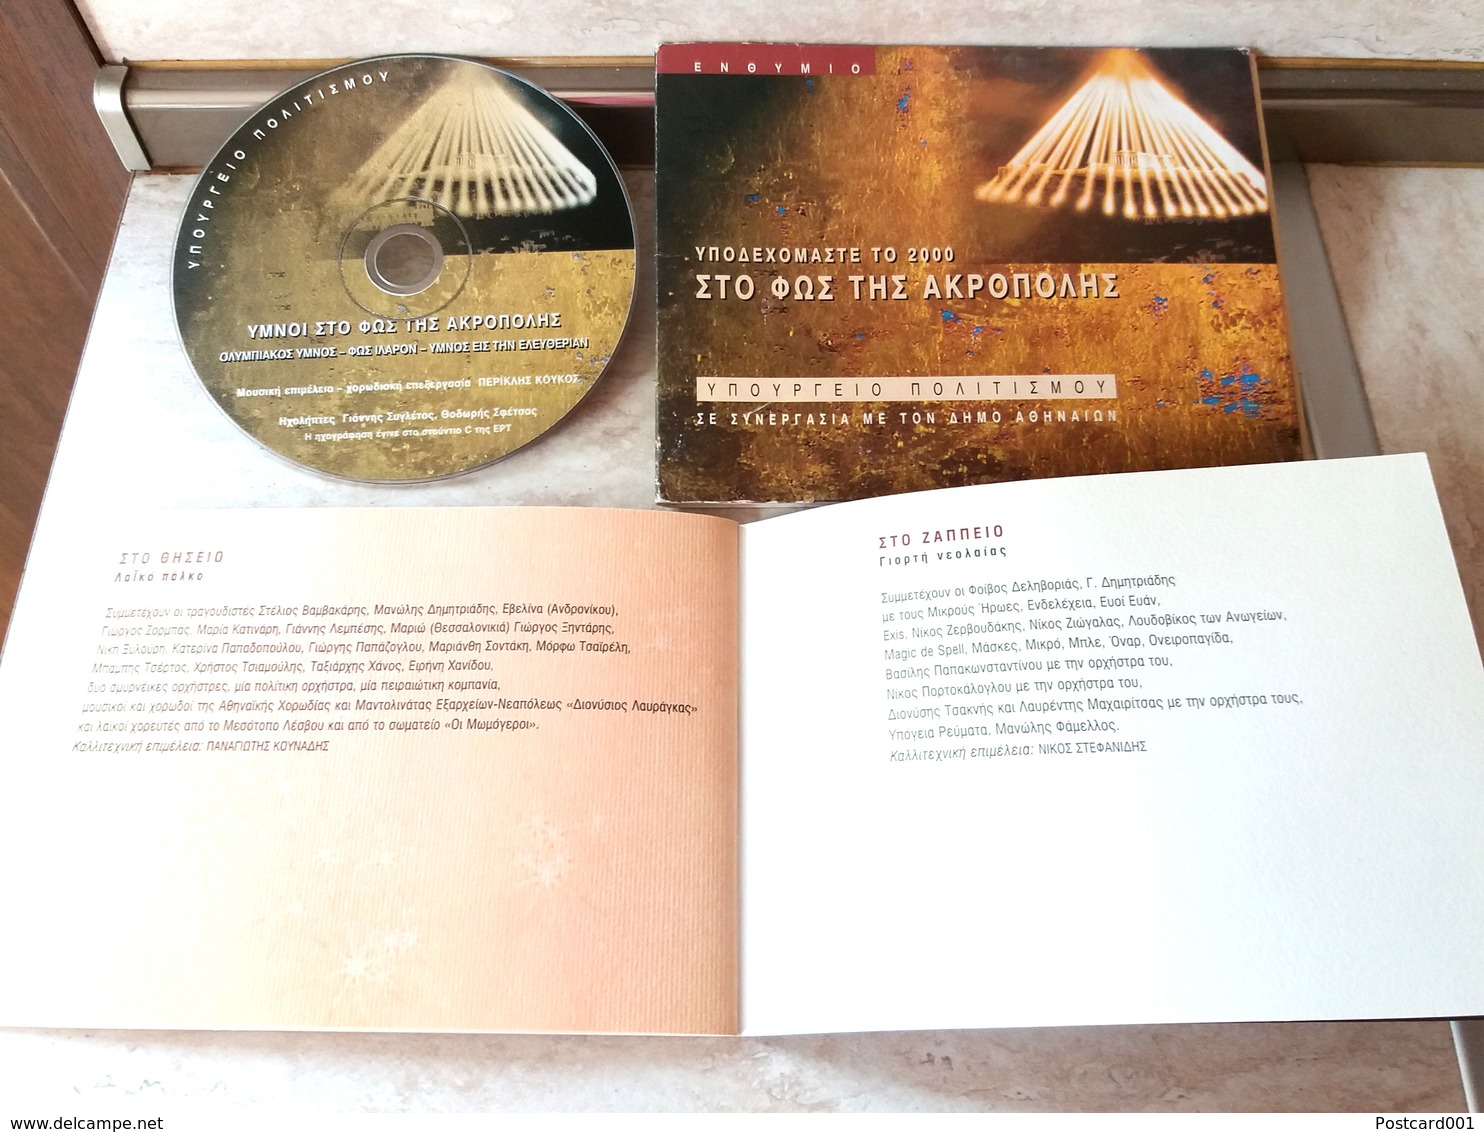 ACROPOLE IN LIGHT AND MUSIC - DVD AND BOOK WITH TEXTS OF GREEK SONGS (2) - DVD Musicales